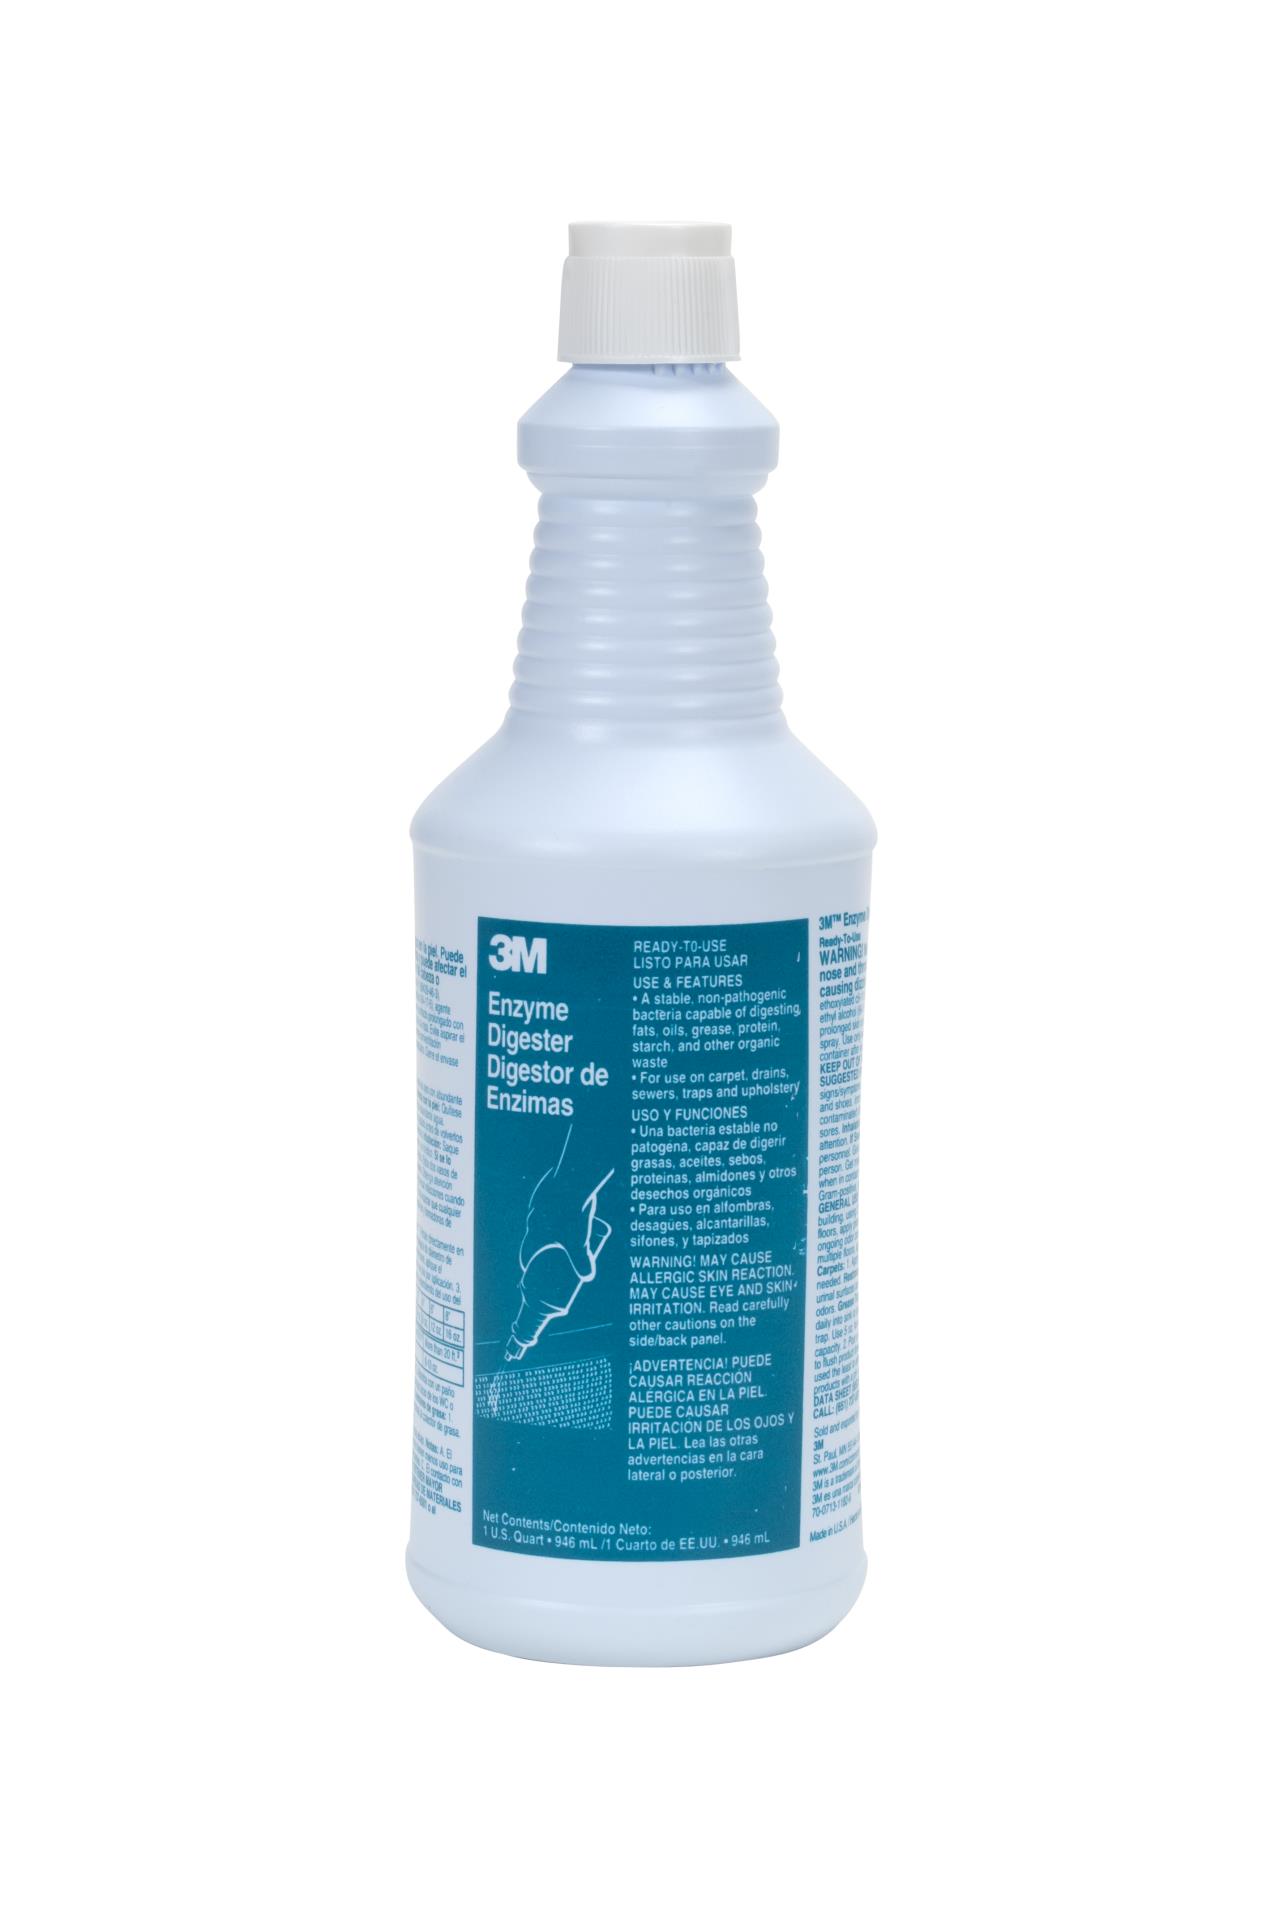 50048011347535 3M™ Enzyme Digester Ready-to-Use 34753, Quart, 12/Case  Aircraft products 3M 9378117